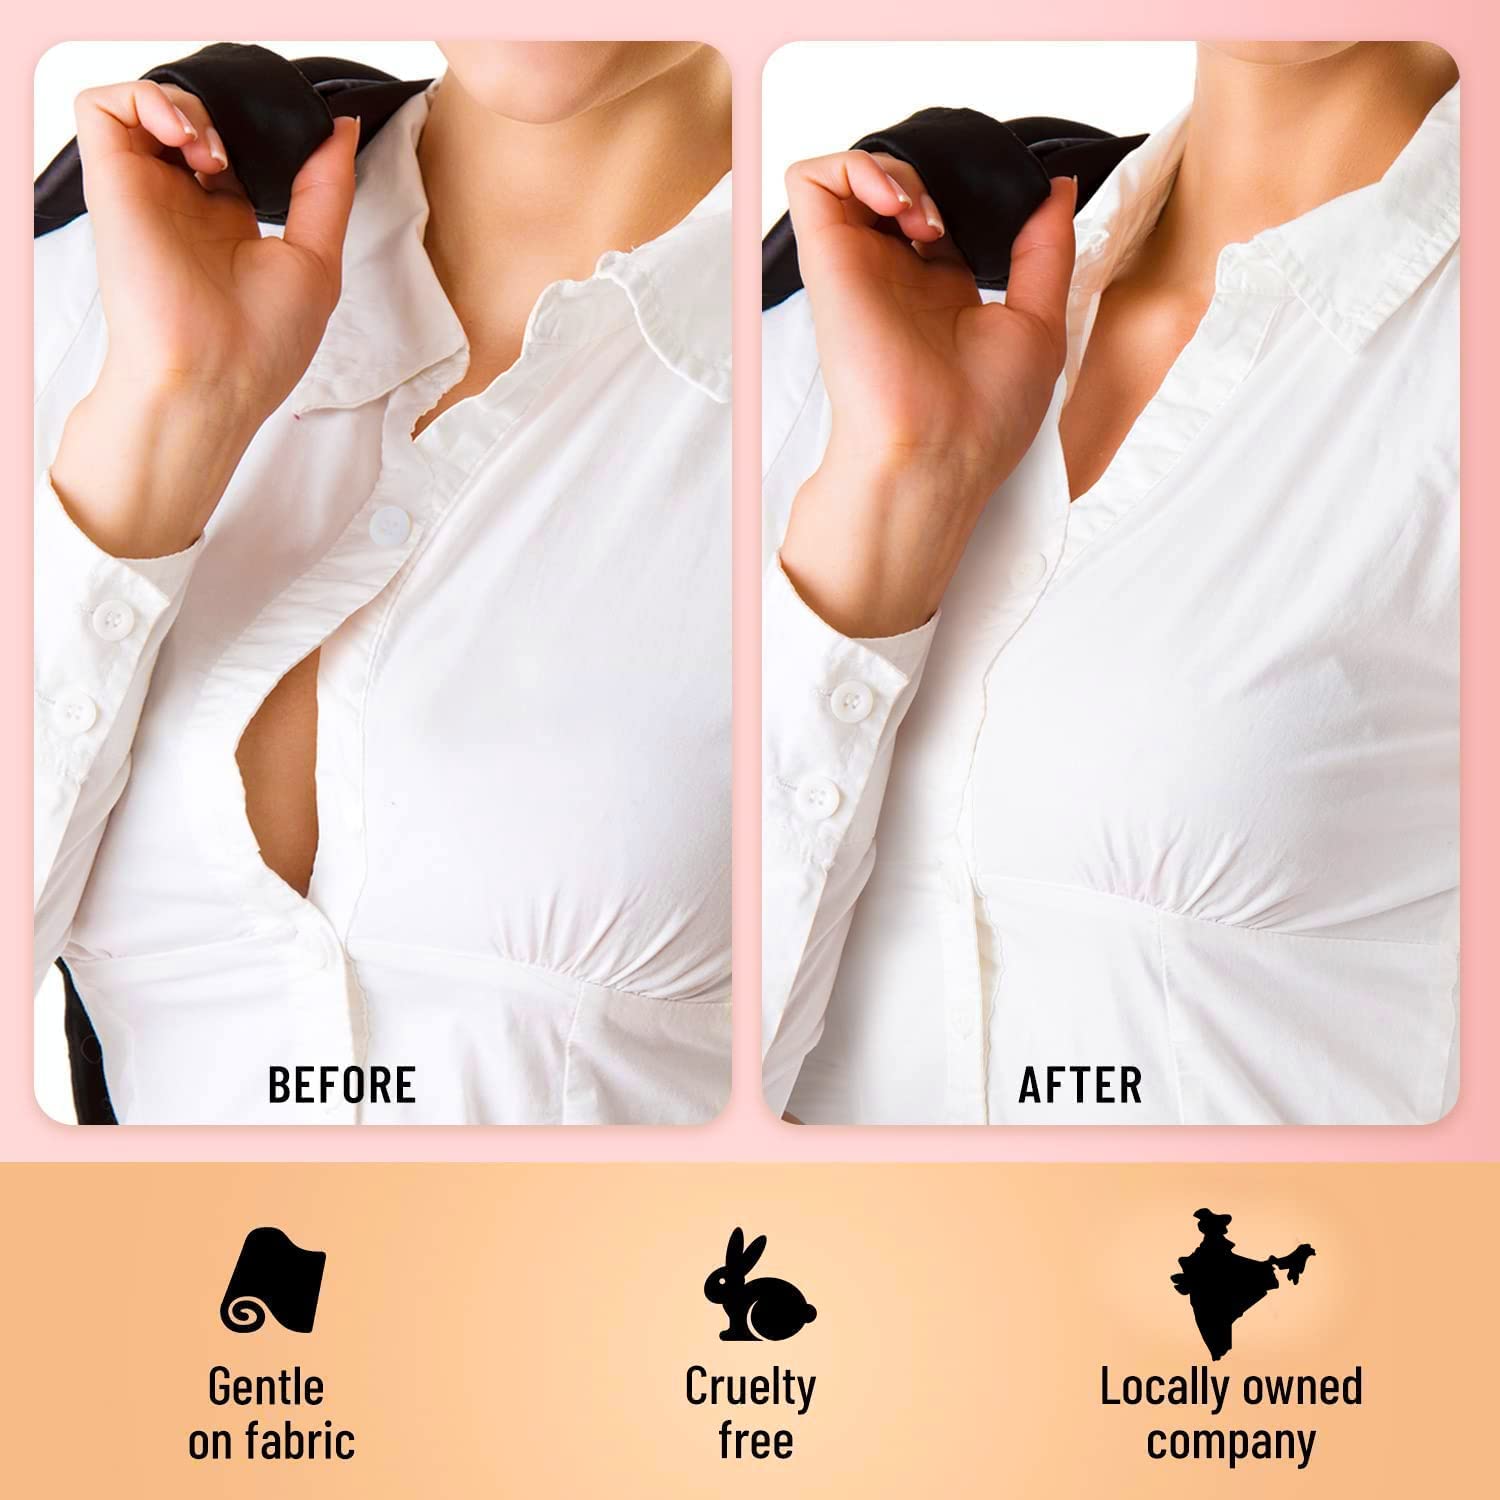 Slip-on Strapless Bra for Teenagers, Girls Beginners Bra Sports Cotton Non-Padded Stylish Crop Top Bra Full Coverage Seamless Non-Wired Gym Workout Training Bra for Kids (Pack of 9)